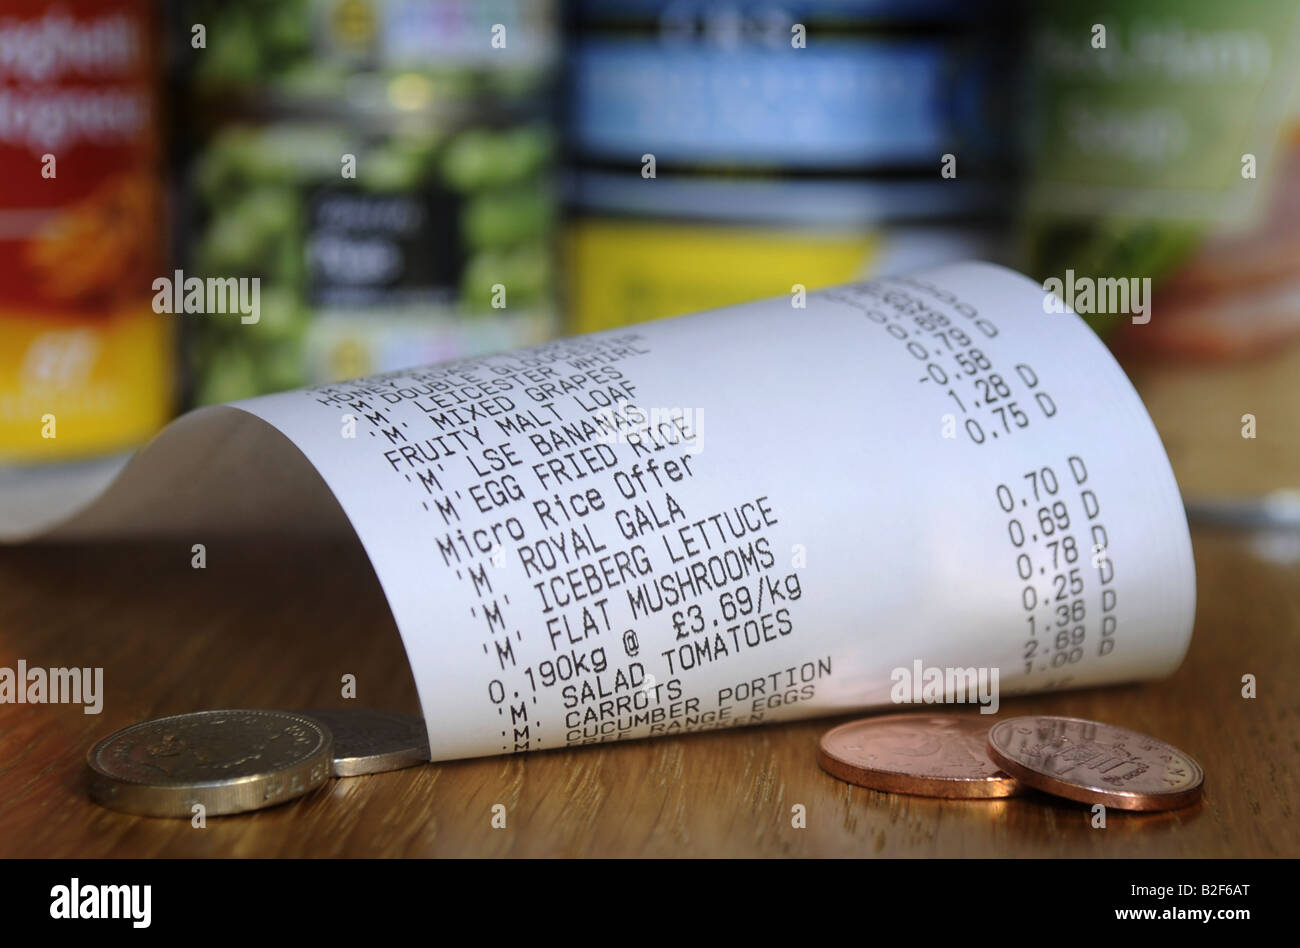 BRITISH SUPERMARKET FOOD BILL SHOWING ITEMS AND PRICES ,UK. Stock Photo